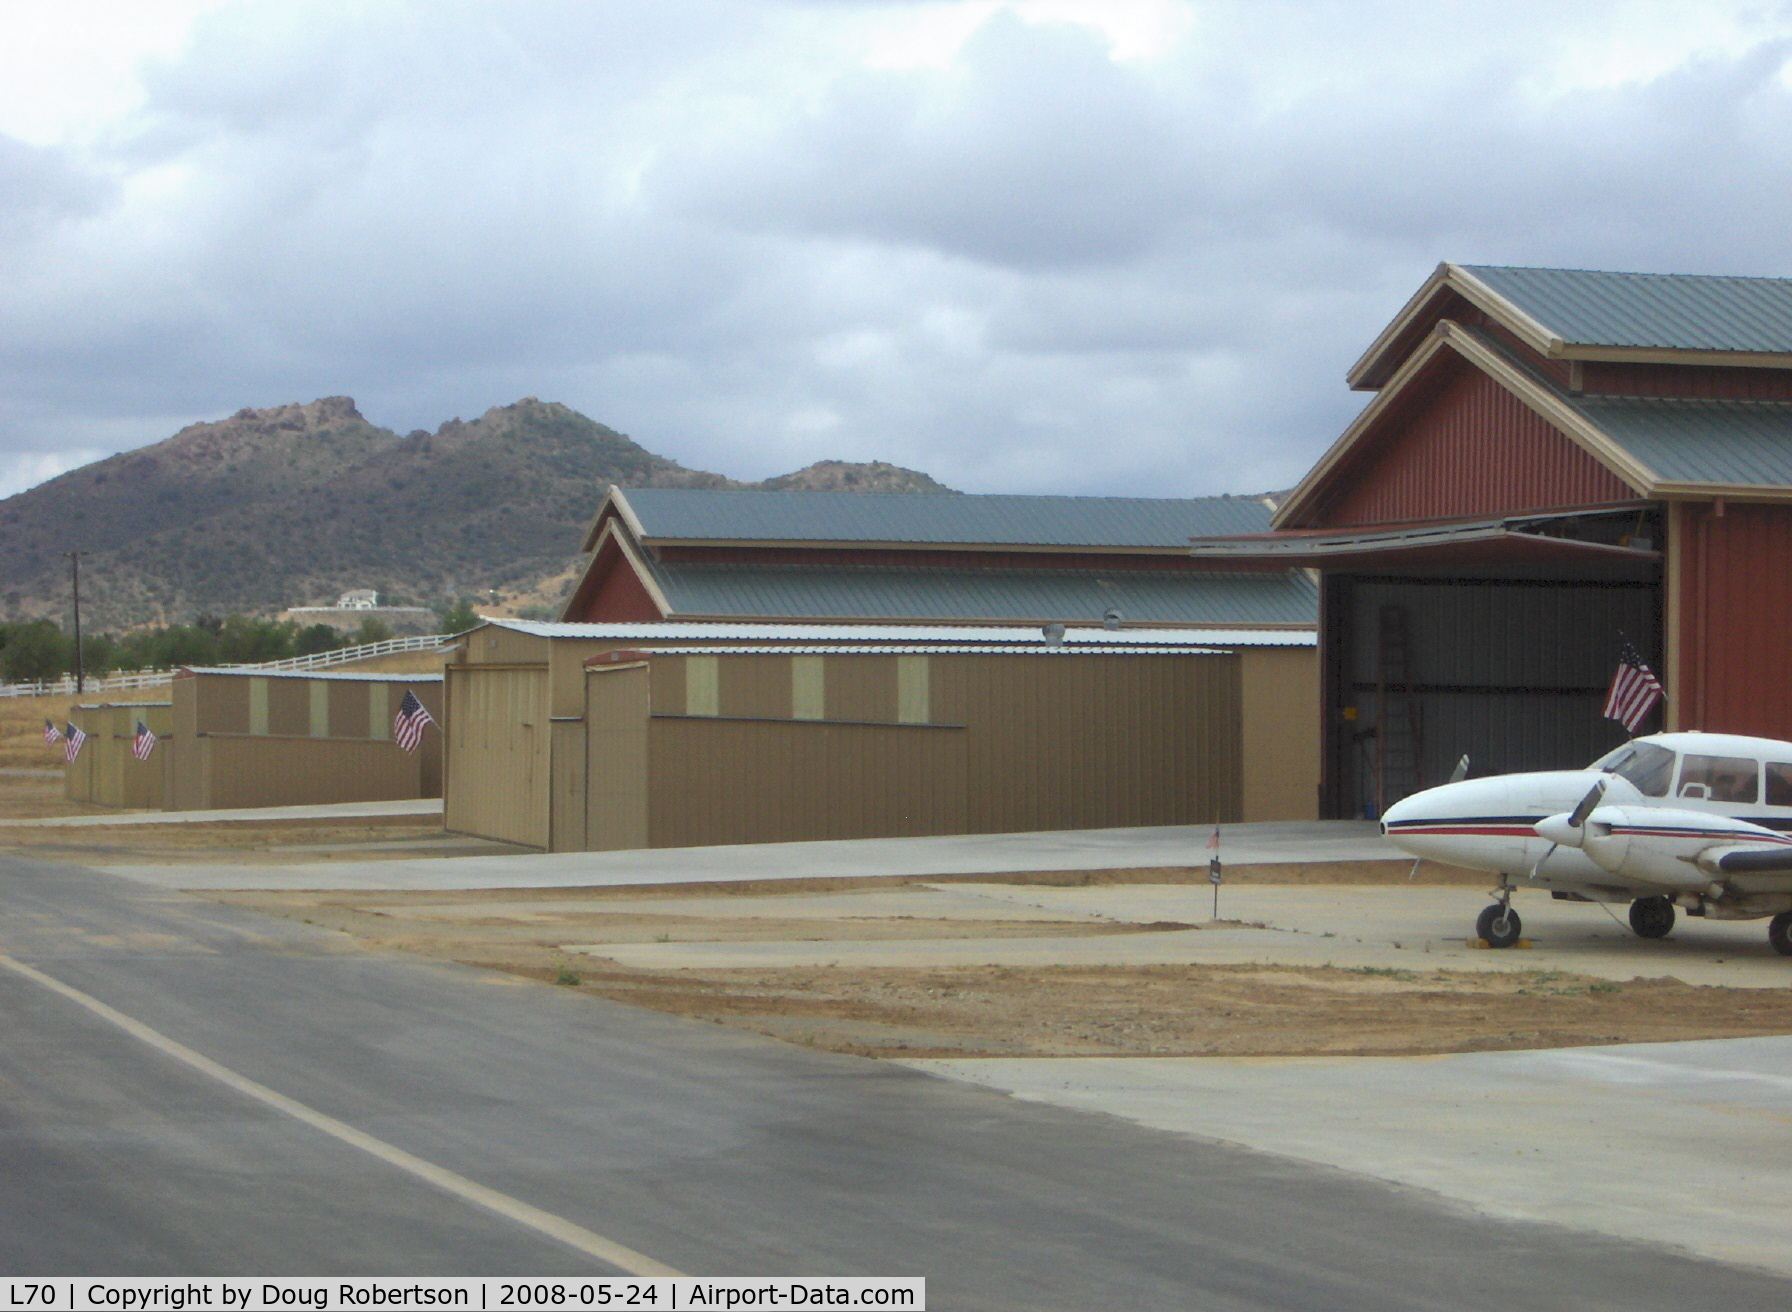 Agua Dulce Airport (L70) - Huge hangars-not crowded. Ranch barn theme.